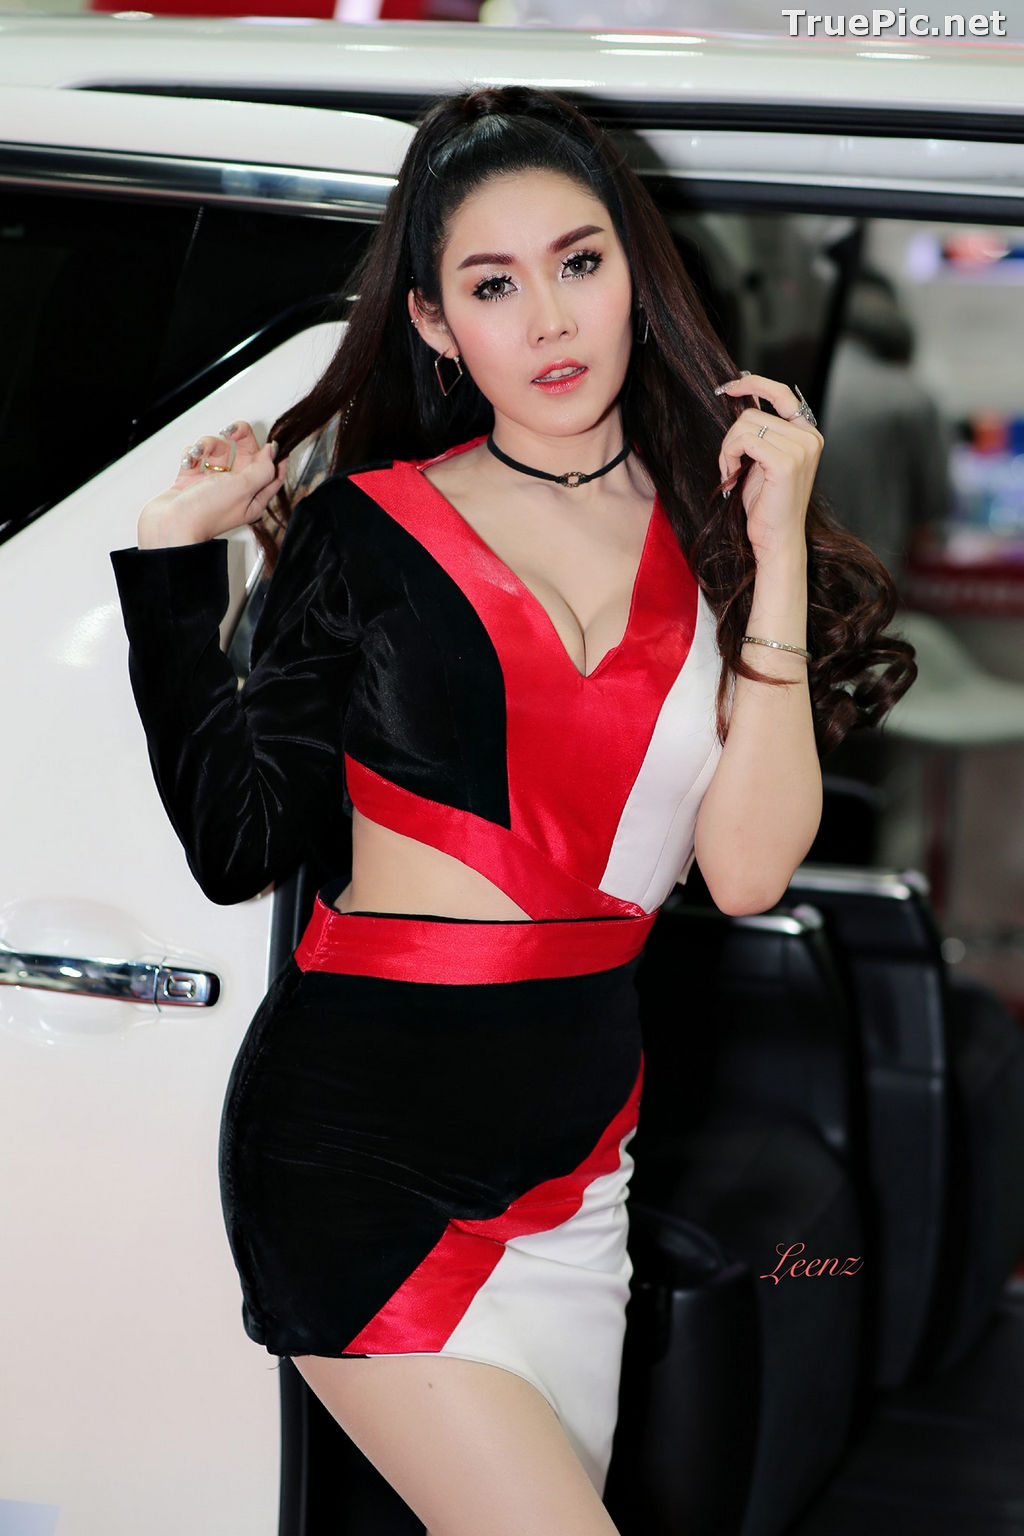 Image Thailand Racing Model - Thailand Showgirl Model Collection #3 - TruePic.net - Picture-61